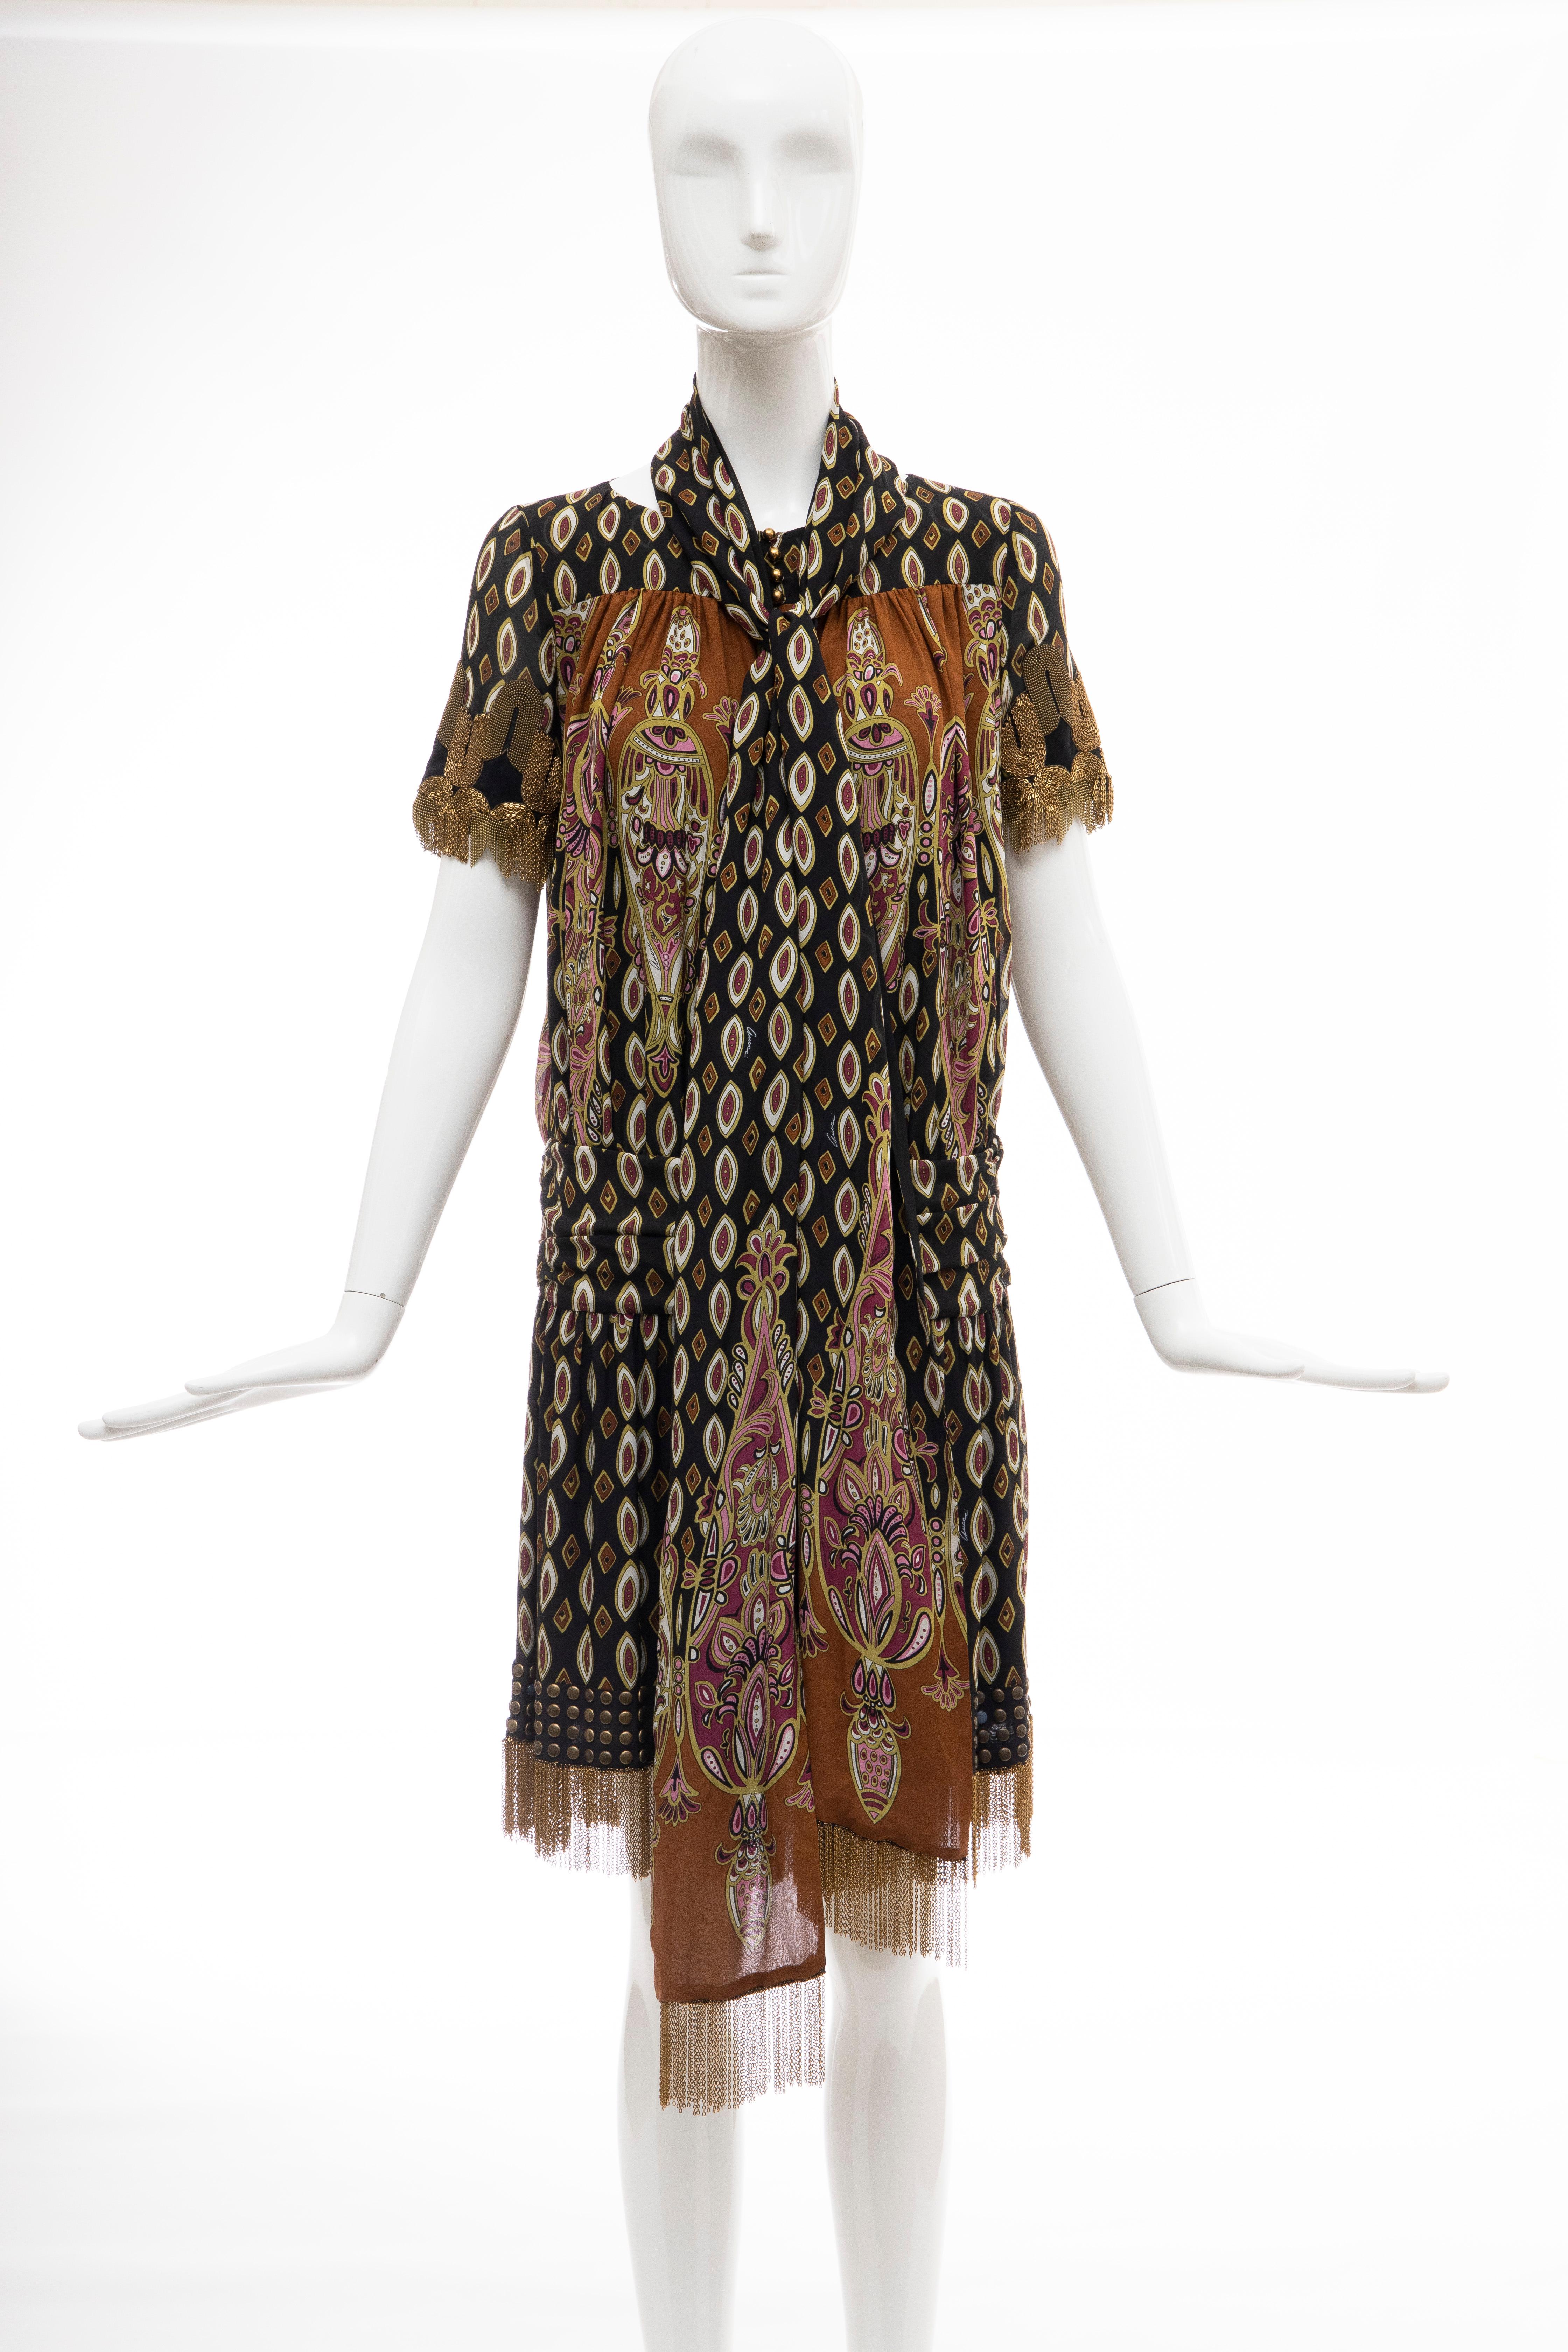 Frida Giannini for Gucci Runway Silk Boteh Pattern Brass Chains Dress, Fall 2008 For Sale 8